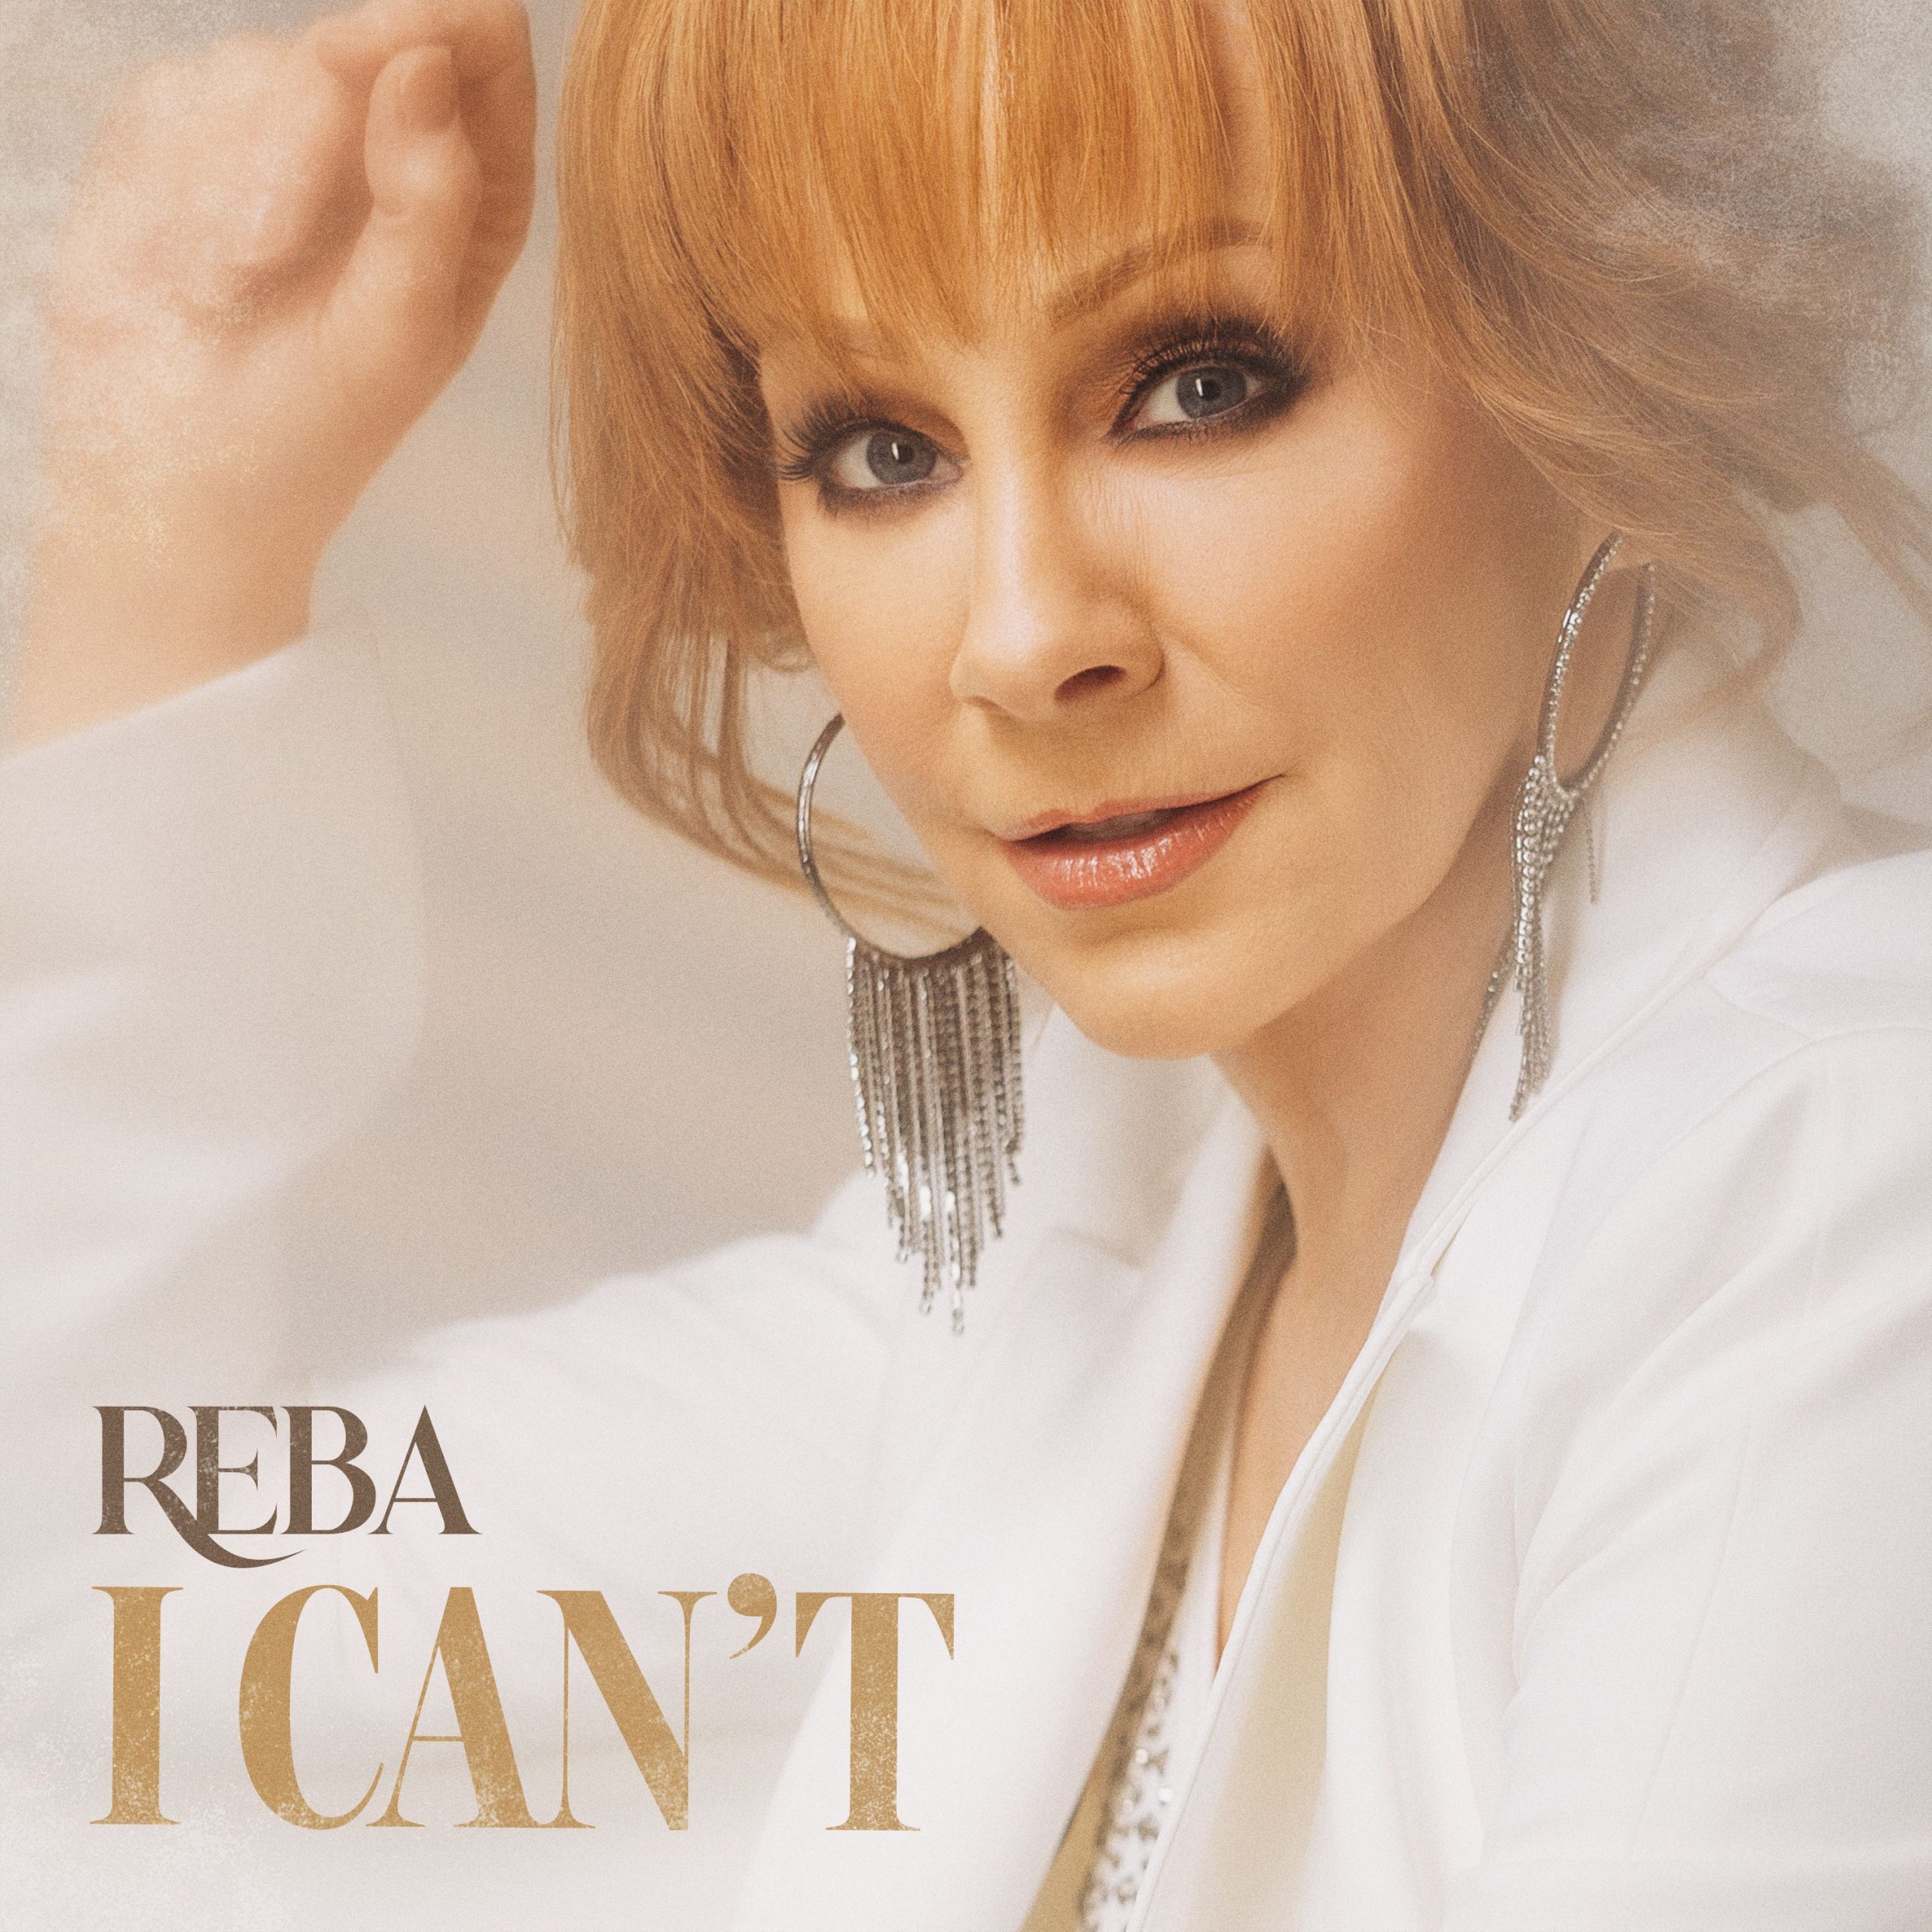 REBA MCENTIRE DEBUTS NEW SINGLE “I CAN’T” WITH ELECTRIC PERFORMANCE ON NBC’S THE VOICE